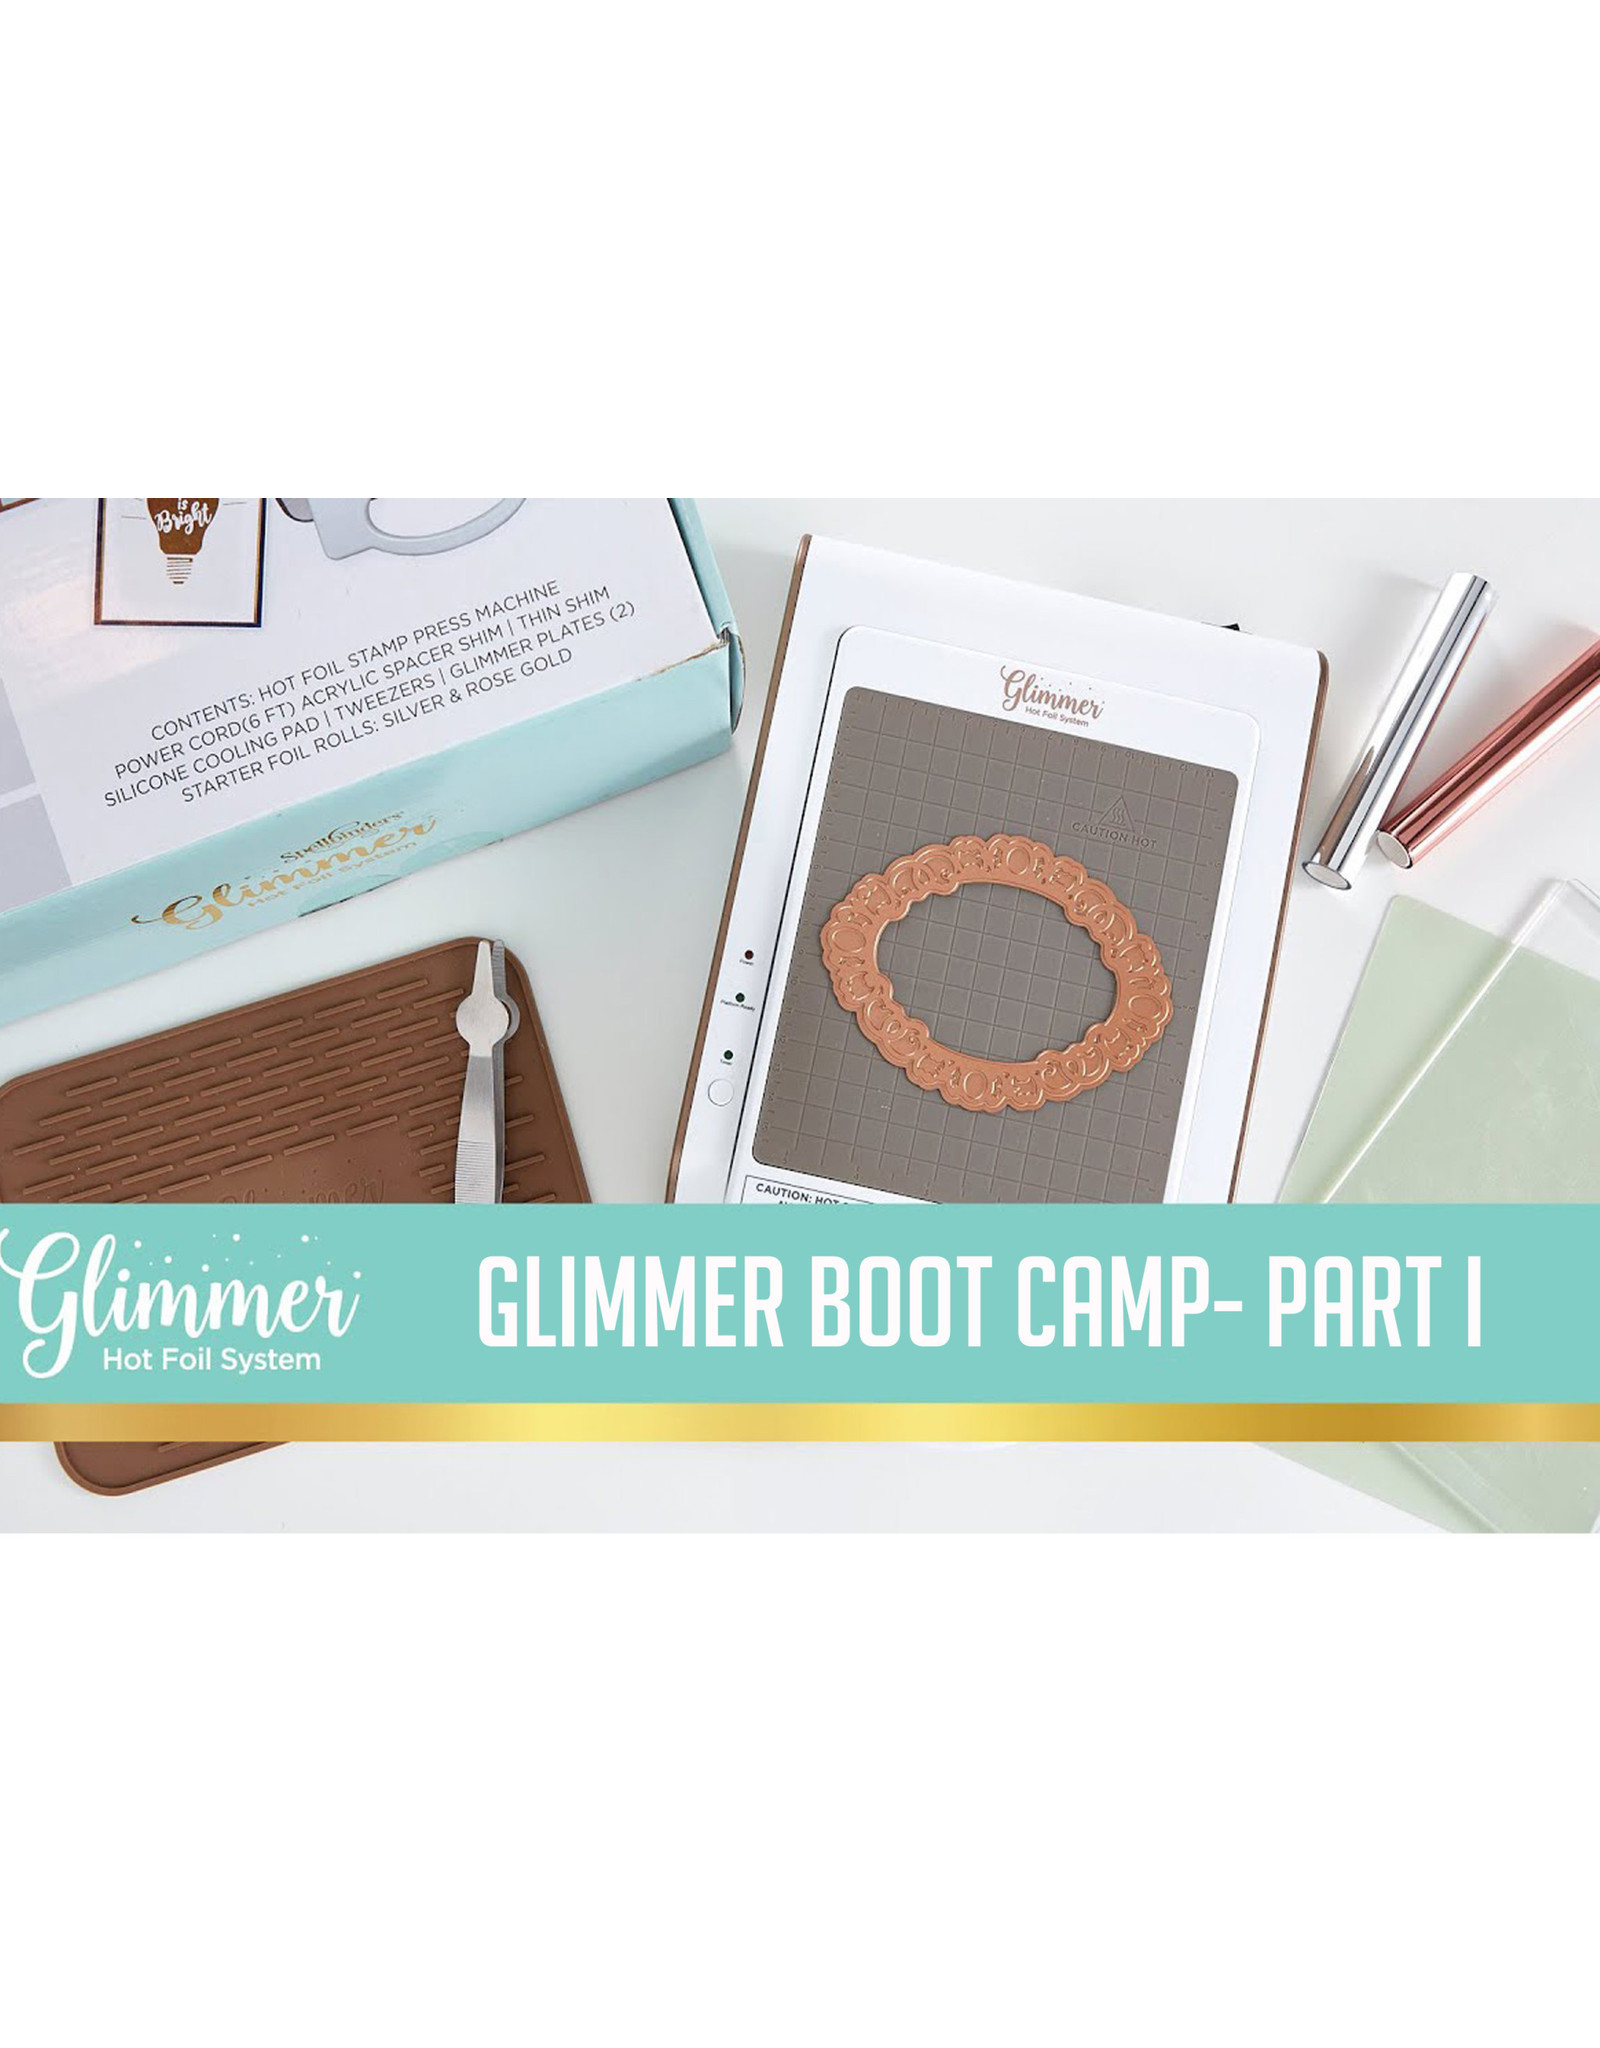 Glimmer Boot Camp- Part I